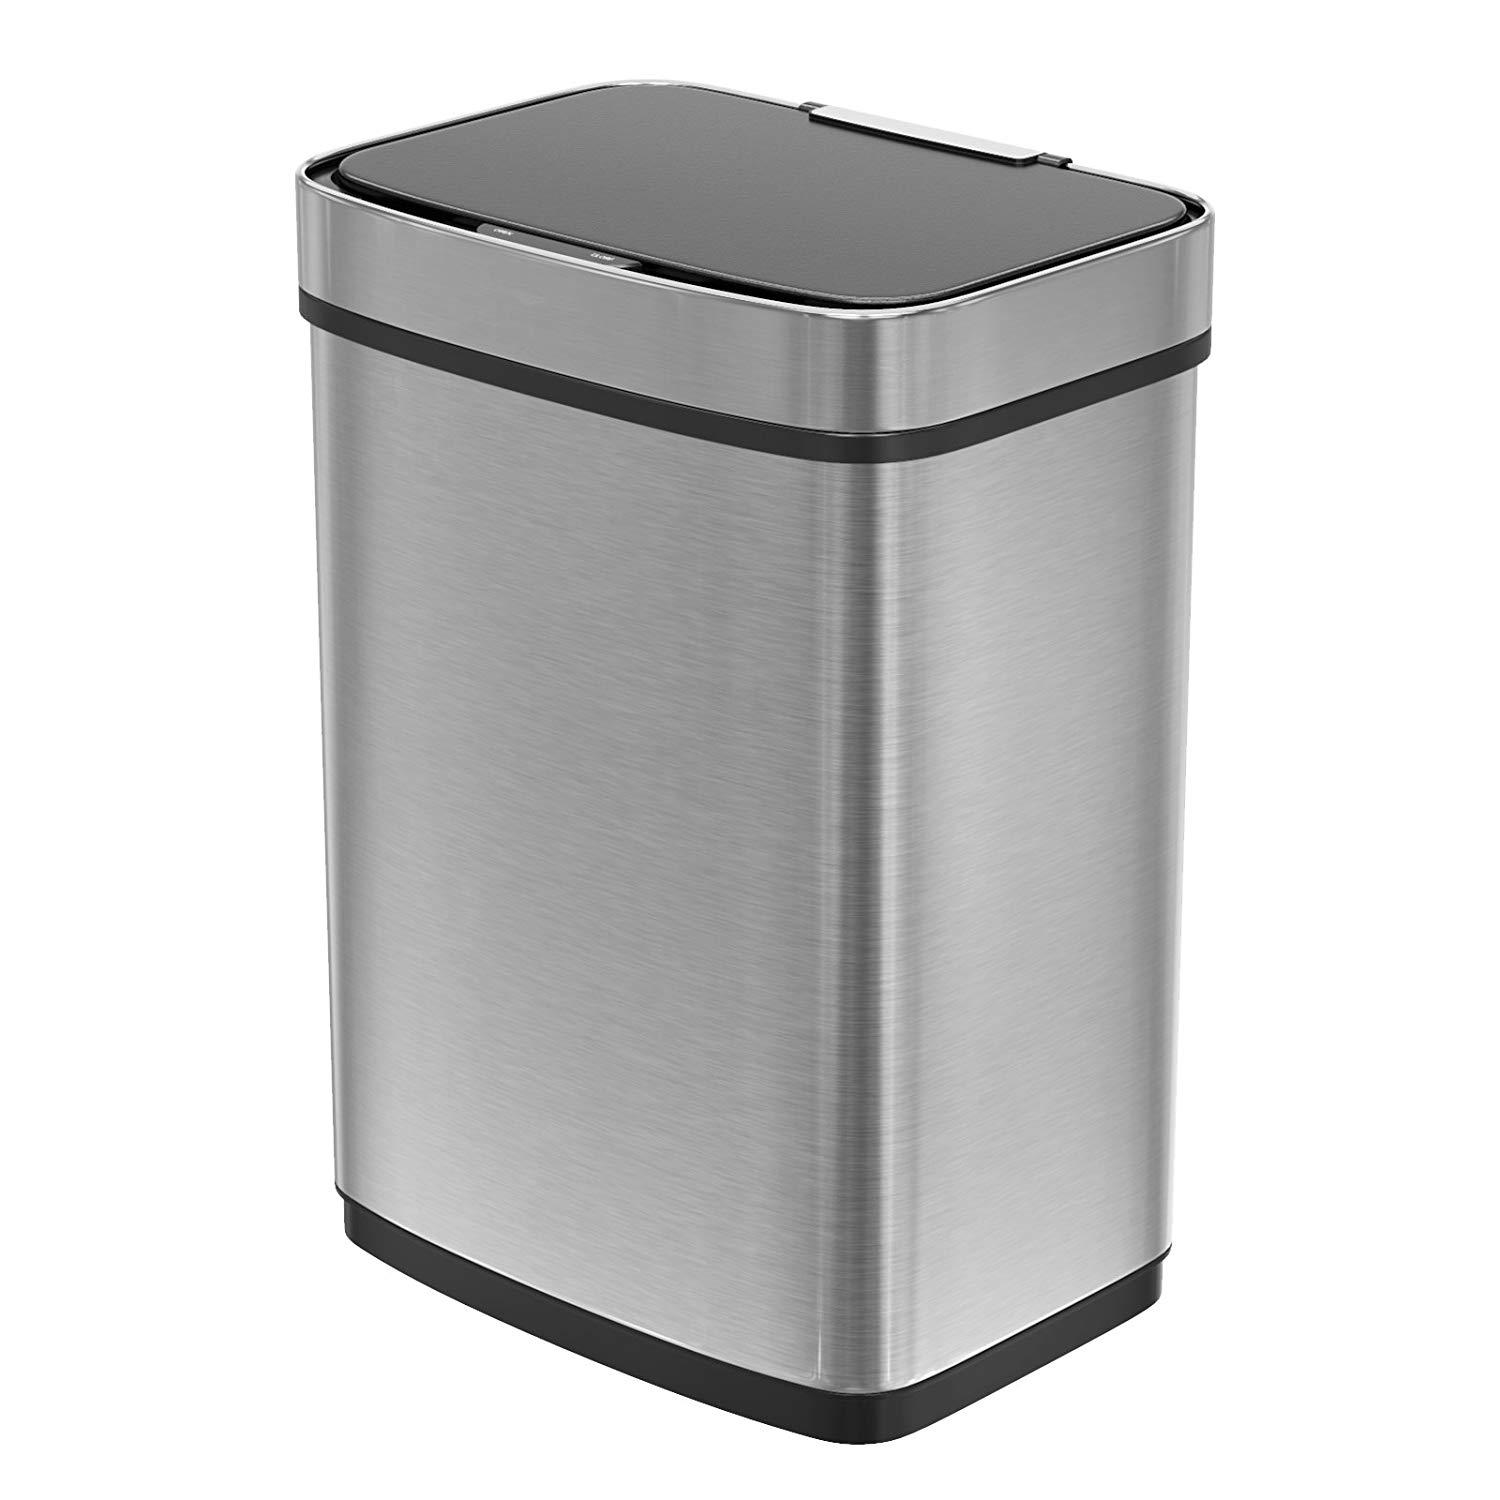 1home 55L Stainless Steel Automatic Sensor Touchless Kitchen Waste Dust Bin Silver. $52 MSRP